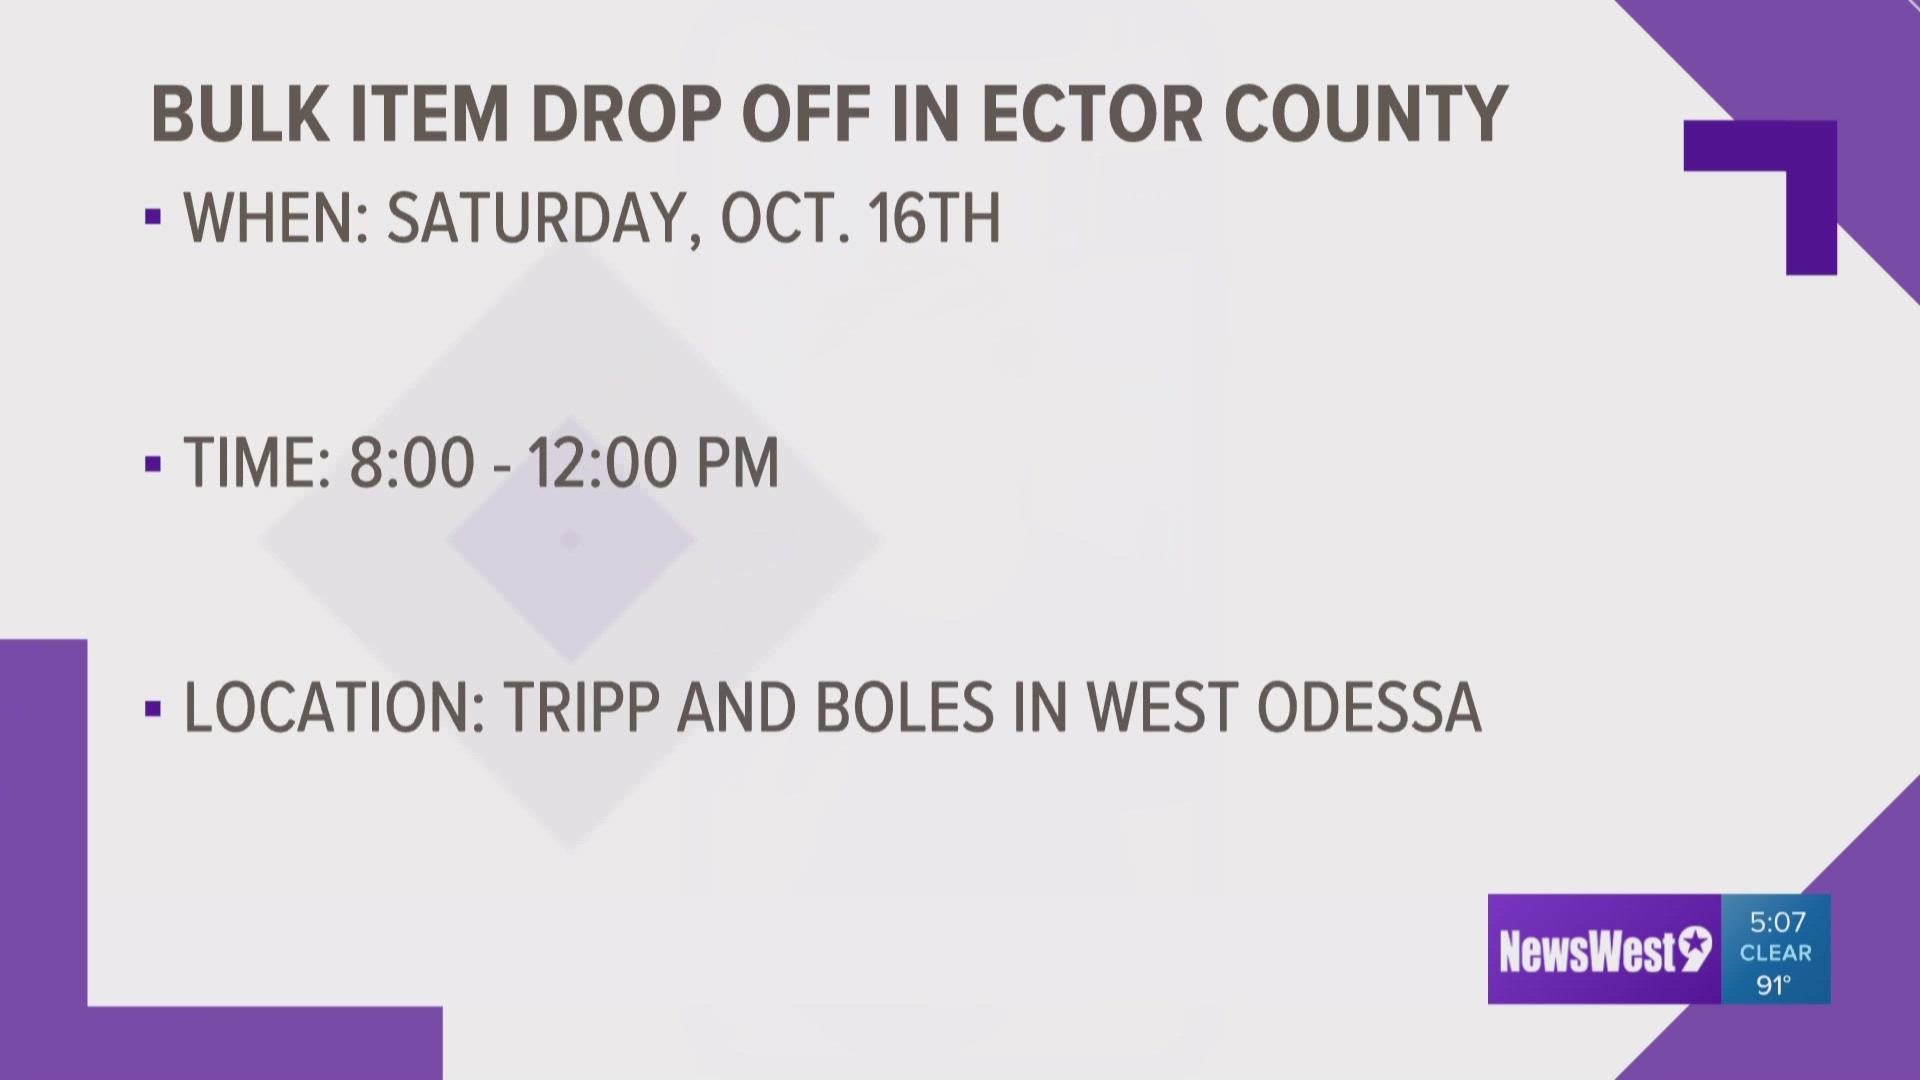 This event will take place on October 16 from 8:00 a.m. to 12:00 p.m. at the Ector Property located at Tripp and Boles.